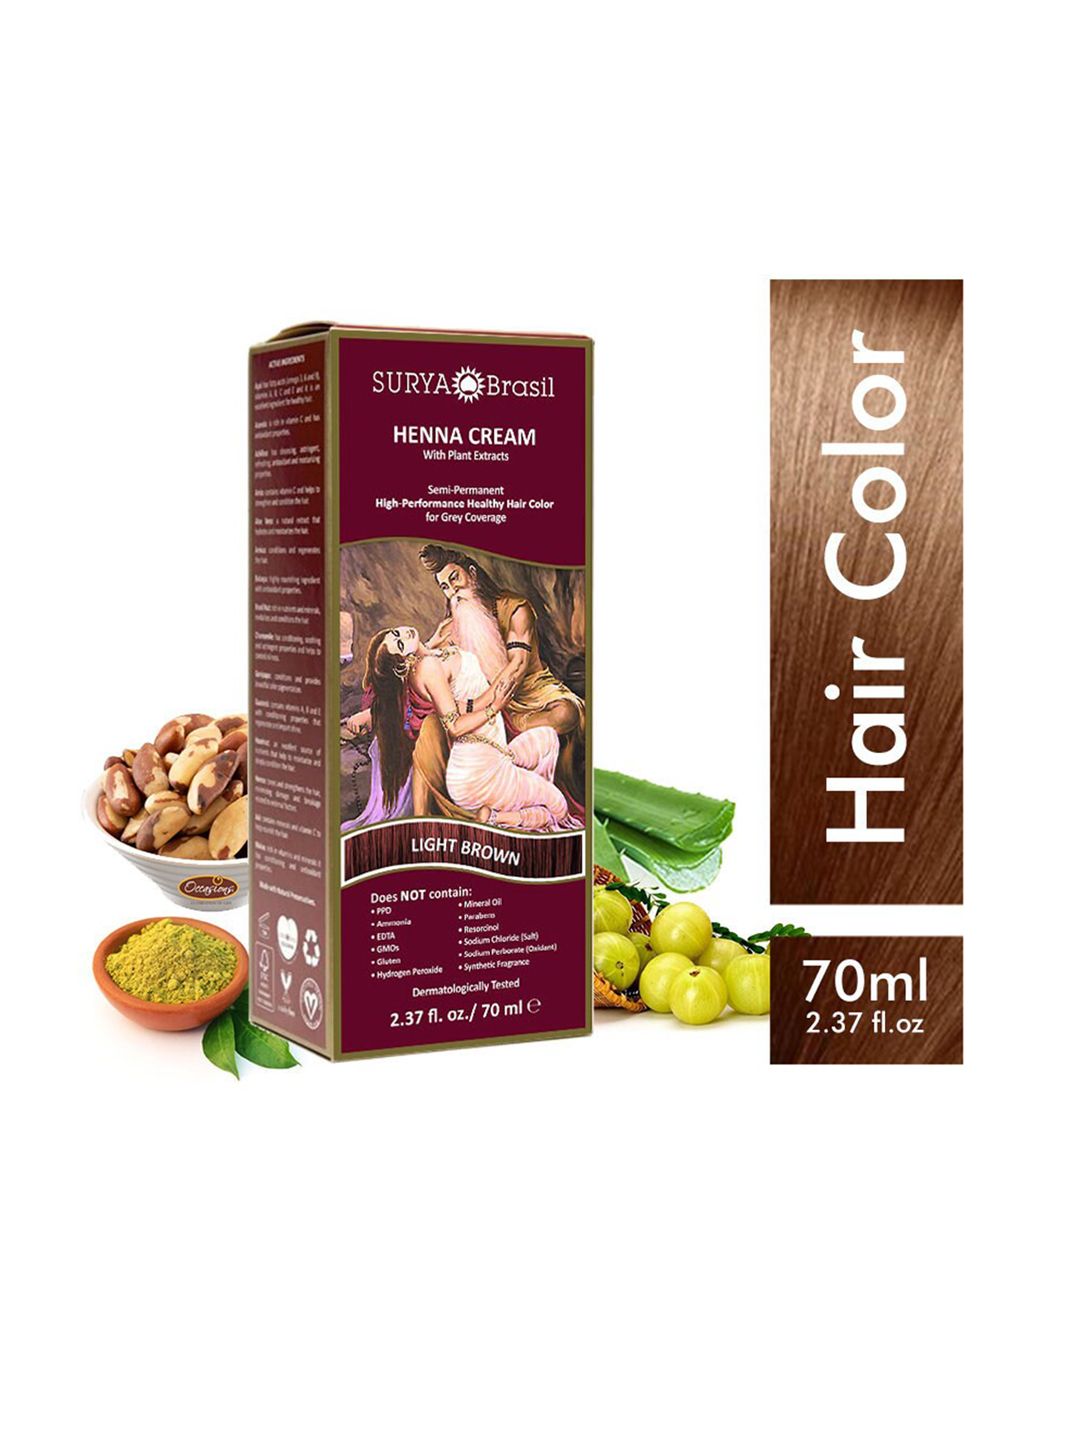 SURYA Brasil Henna Cream Semi-Permanent Hair Color with Plant Extracts 70ml - Light Brown Price in India